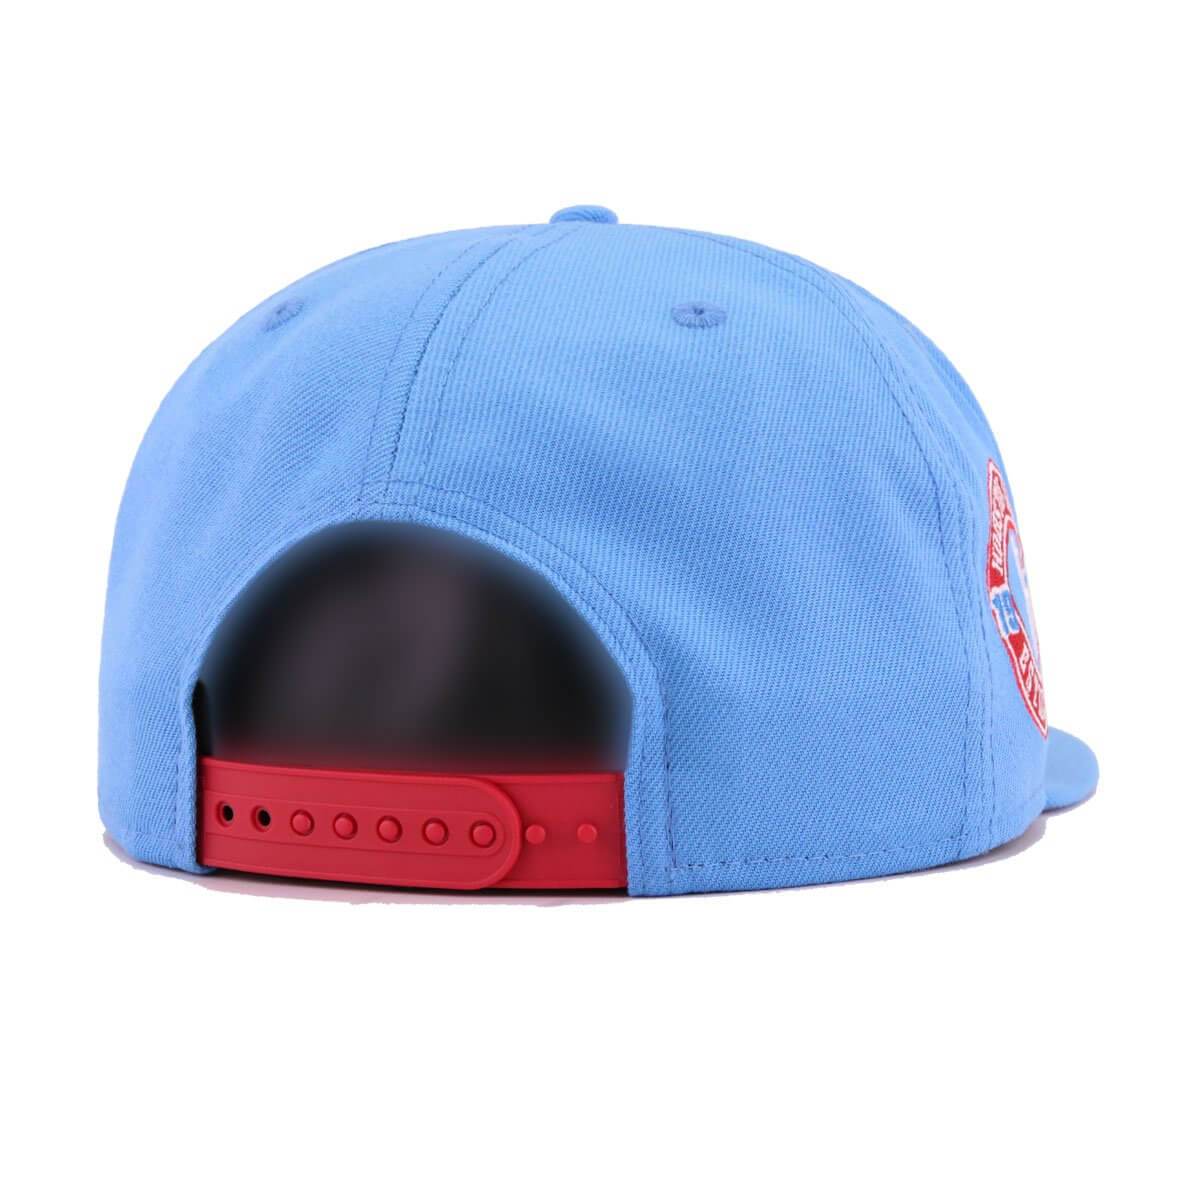 Houston Oilers New Era Gridiron Classics Flawless 9FIFTY Snapback Hat -  Light Blue/Red